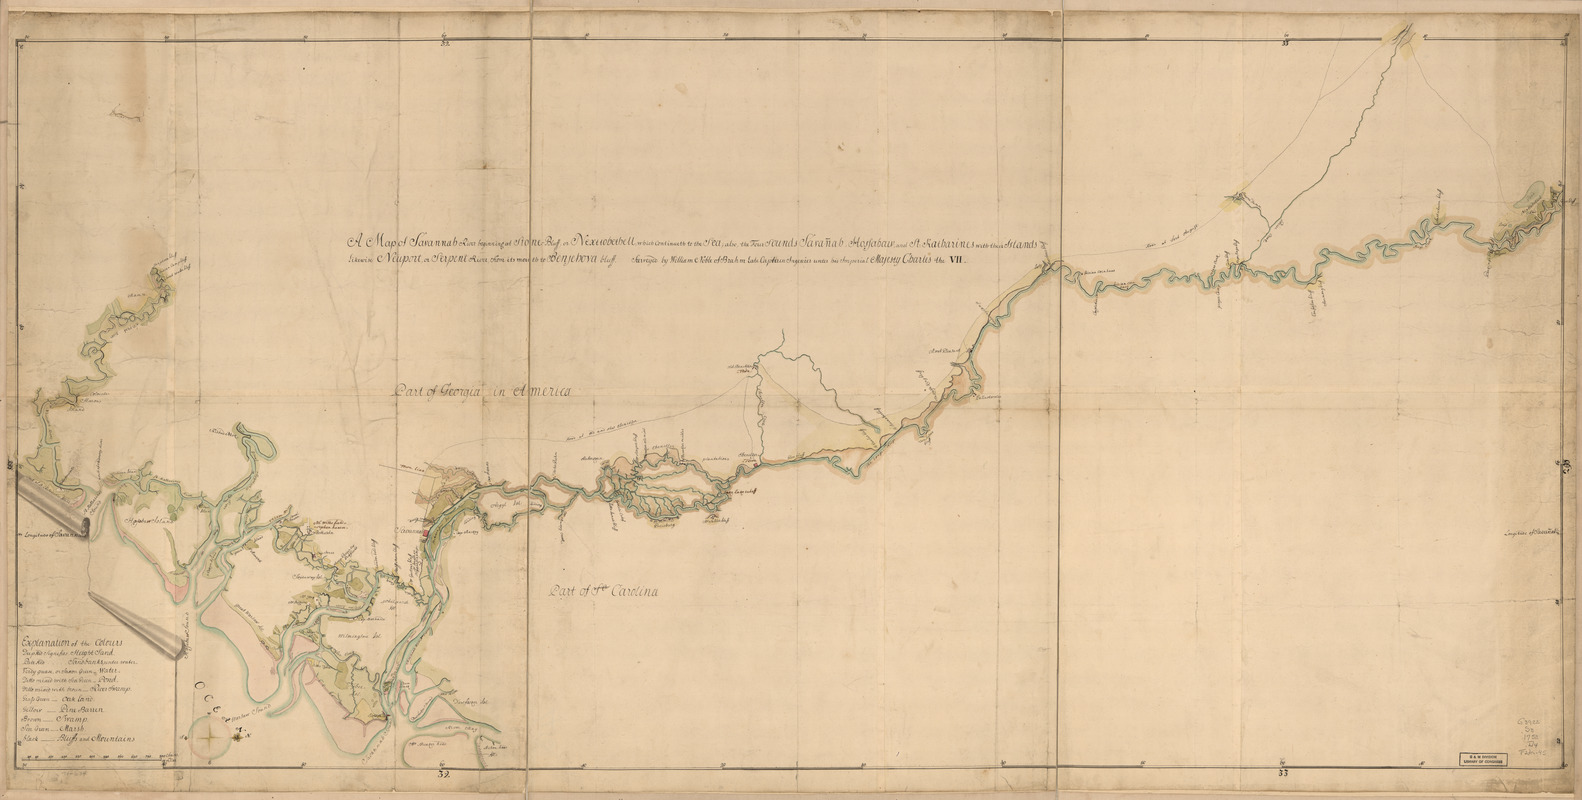 A map of Savannah River beginning at Stone-Bluff, or Nexttobethell, which continueth to the sea